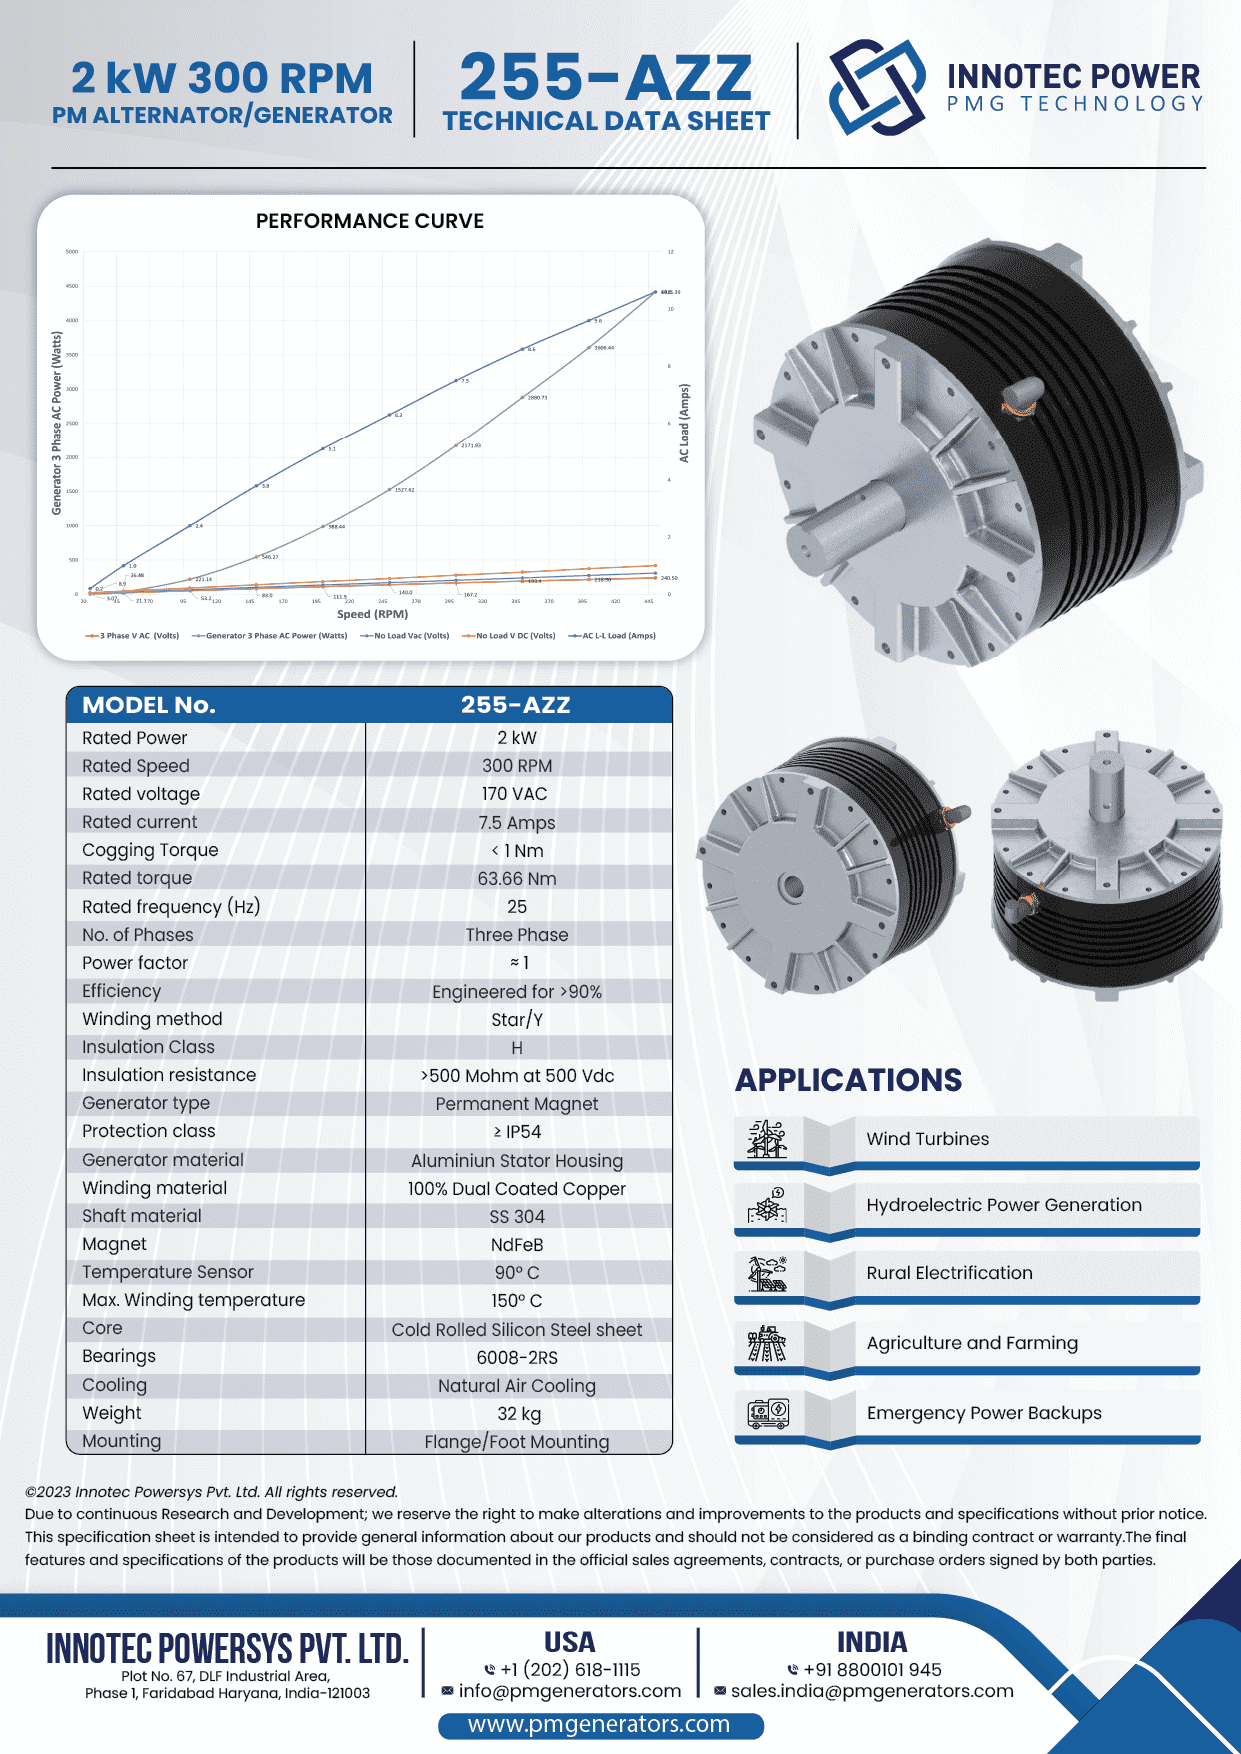 Technical data sheet of our 2kW 300 RPM Wind turbine alternator at 170 VAC